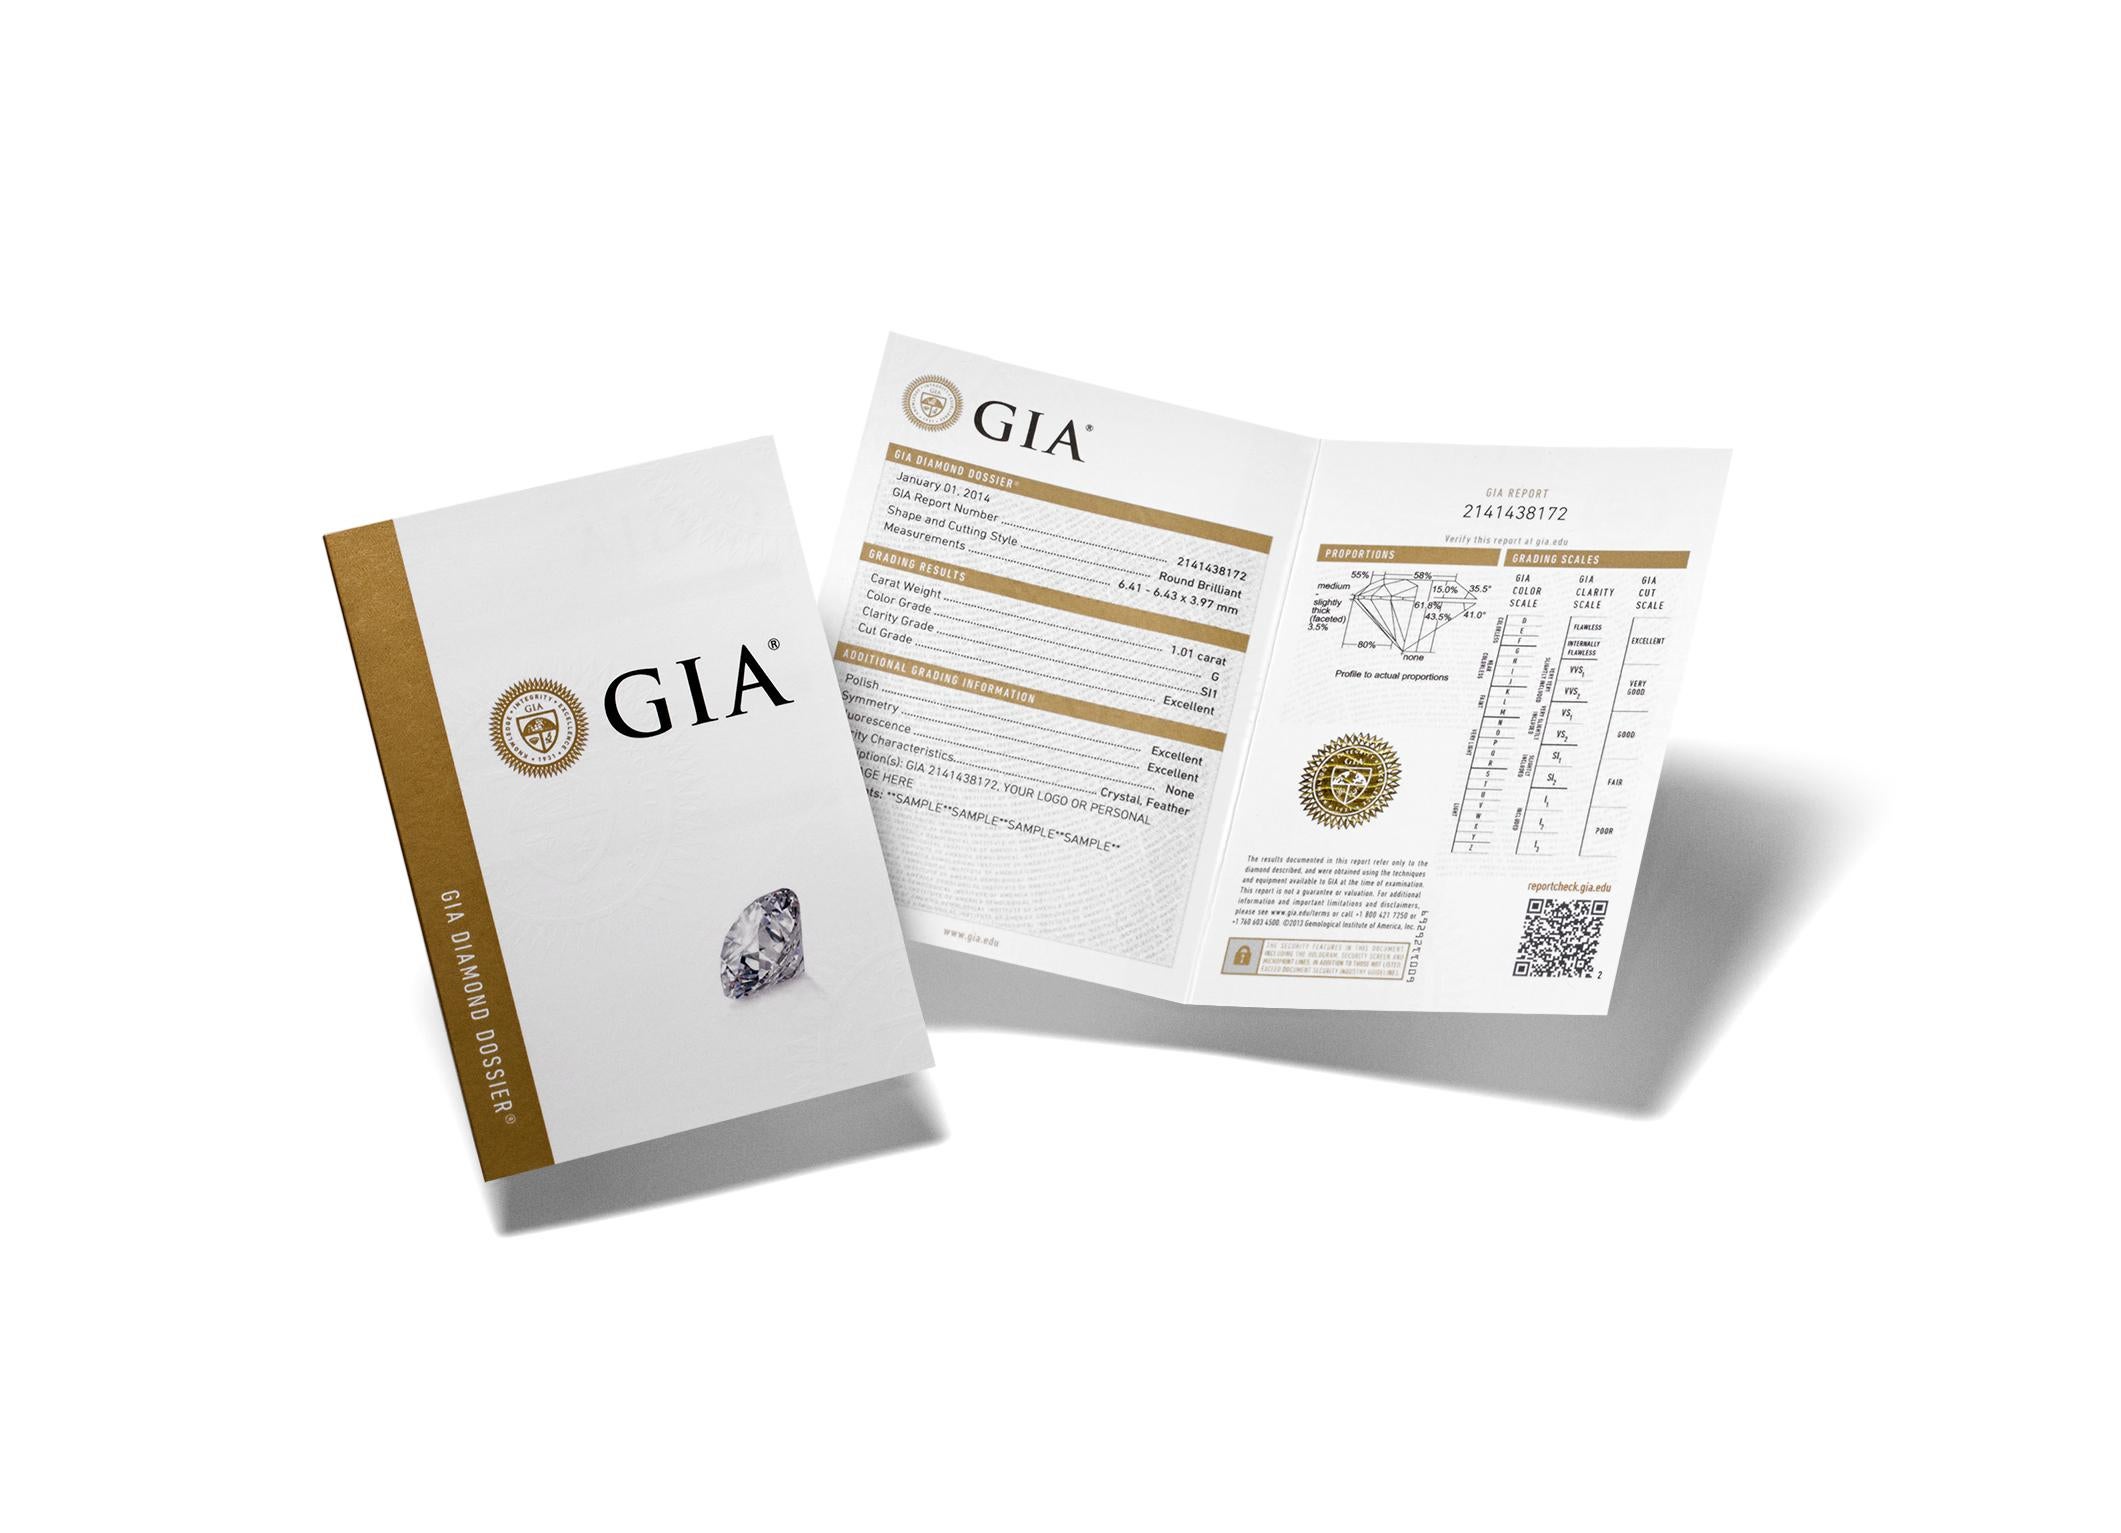 GIA Certified 0.50 Carat, G/IF, Brilliant Cut, Excellent Natural Diamond

Perfect Brilliants for perfect gifts.

5 C's:

Certificate: GIA
Carat: 0.50ct
Color: G
Clarity: IF(Internally Flawless)
Cut: Excellent

Polish: Excellent
Symmetry: